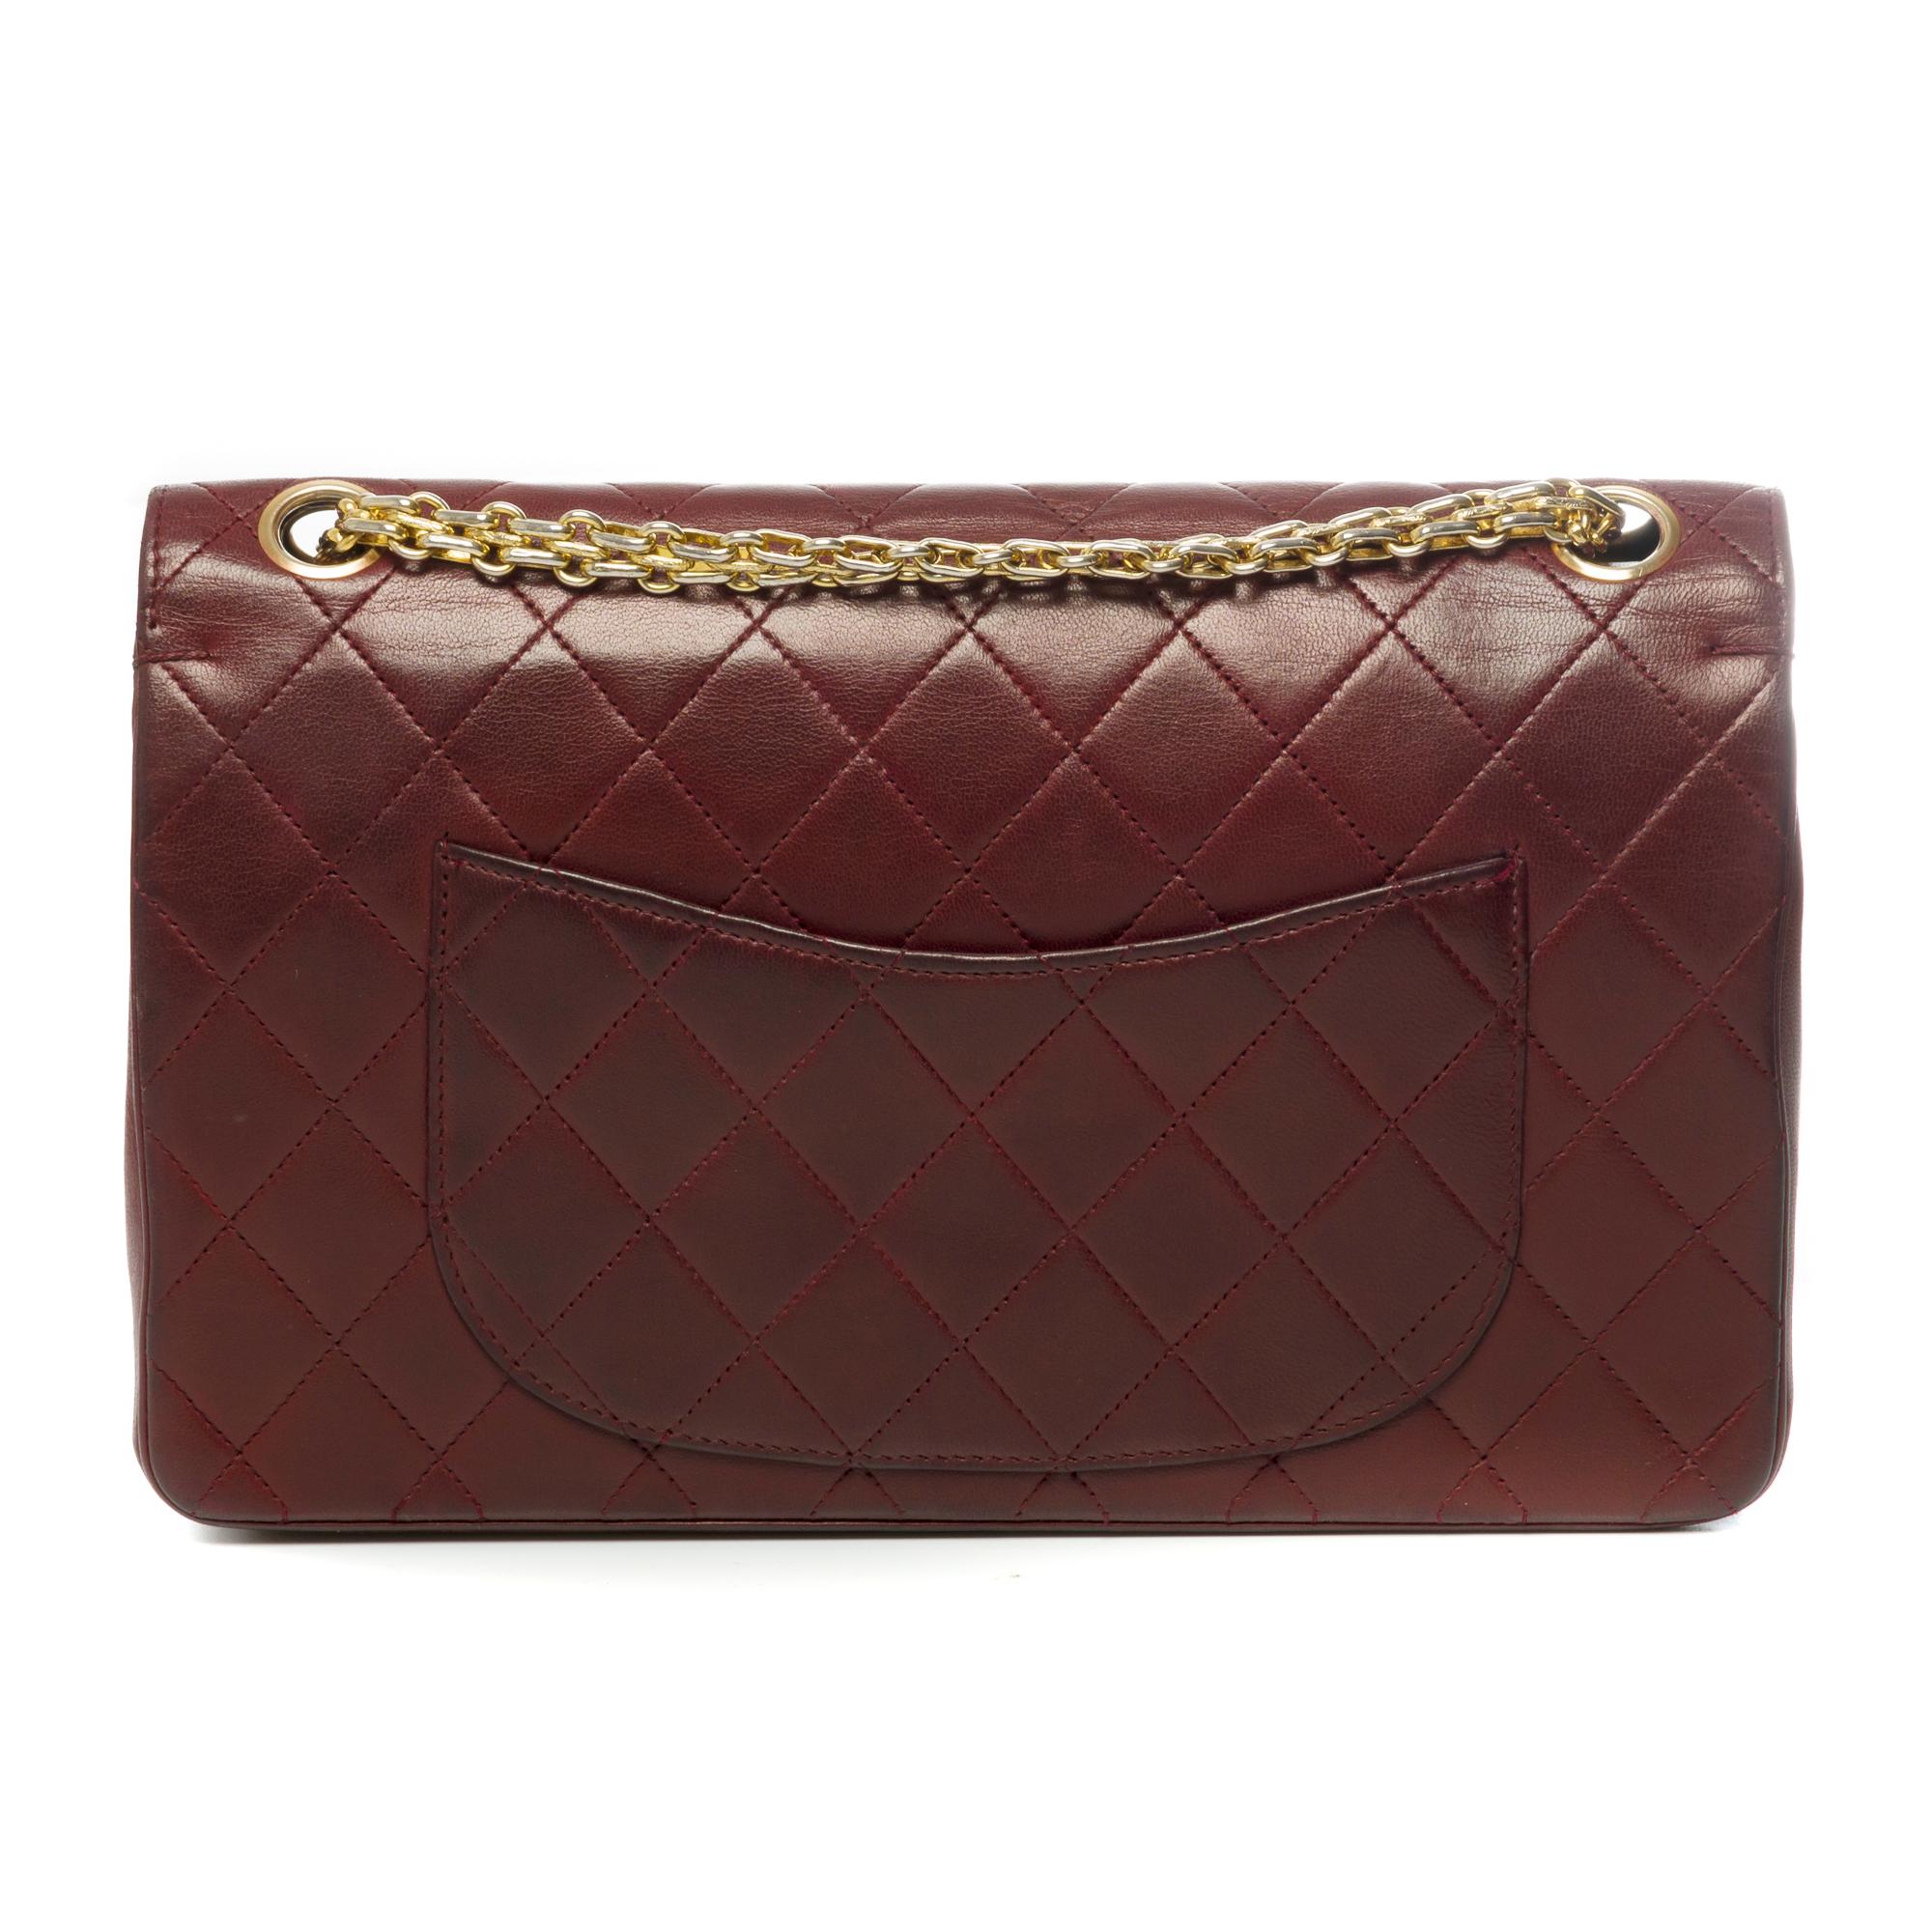 Splendid Timeless bag in burgundy quilted leather (superbly patinated) with double flap, gold metal trim, Mademoiselle chain handle in gold metal allowing a hand or shoulder support or crossbody.
Quilted flap closure, gold metal CC closure.
Lining